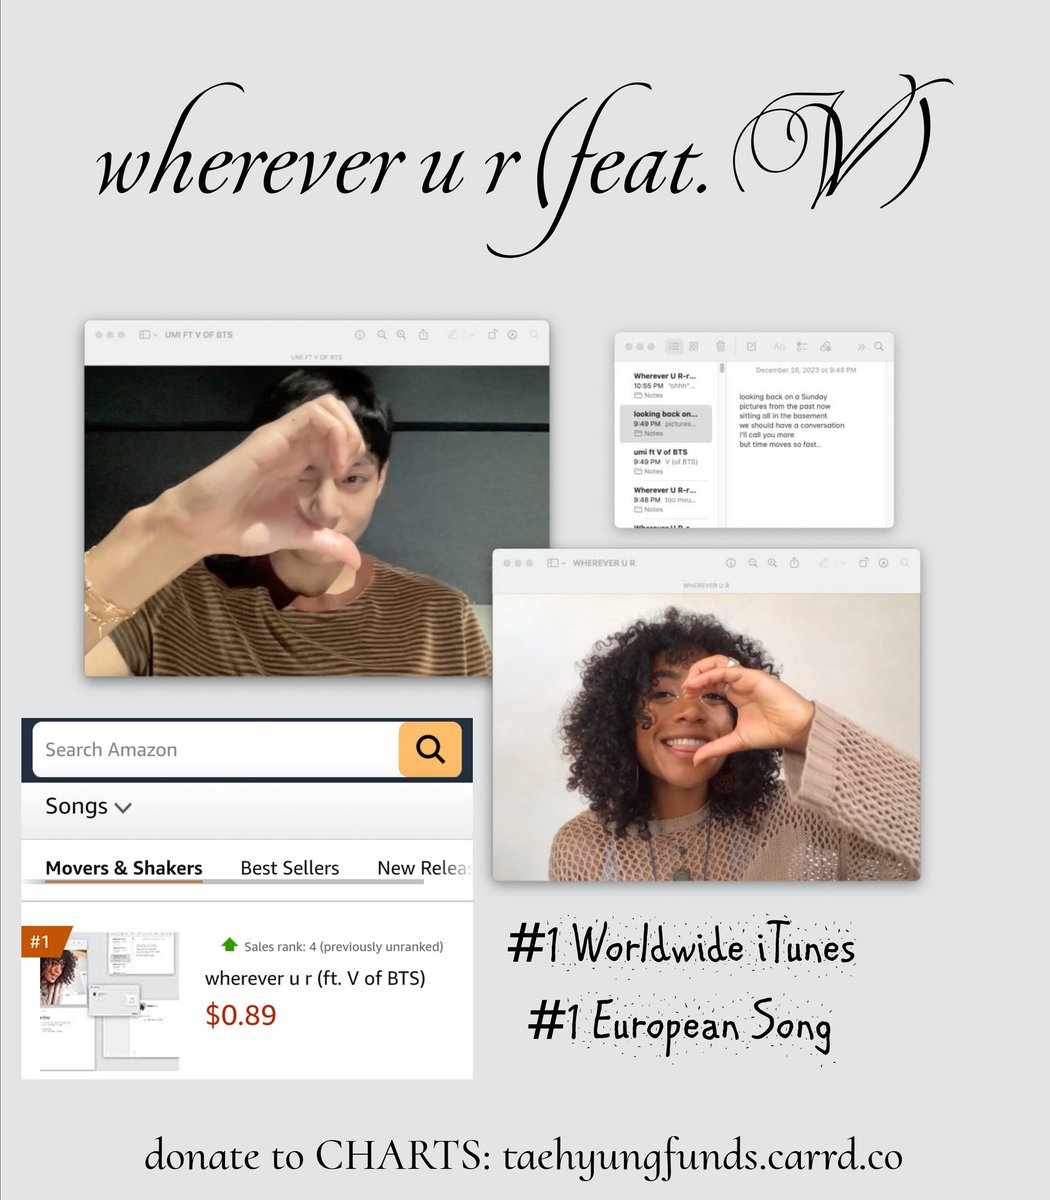 🇺🇸 wherever u r (feat. V) debuts #1 on Amazon Movers & Shakers as the biggest gainer in digital song sales in the USA! US/PR, DM me to keep buying on iTunes too~ we provide all you need. Continue to DM for help to buy & stay #1 on Worldwide iTunes, especially UK, Europe & Japan